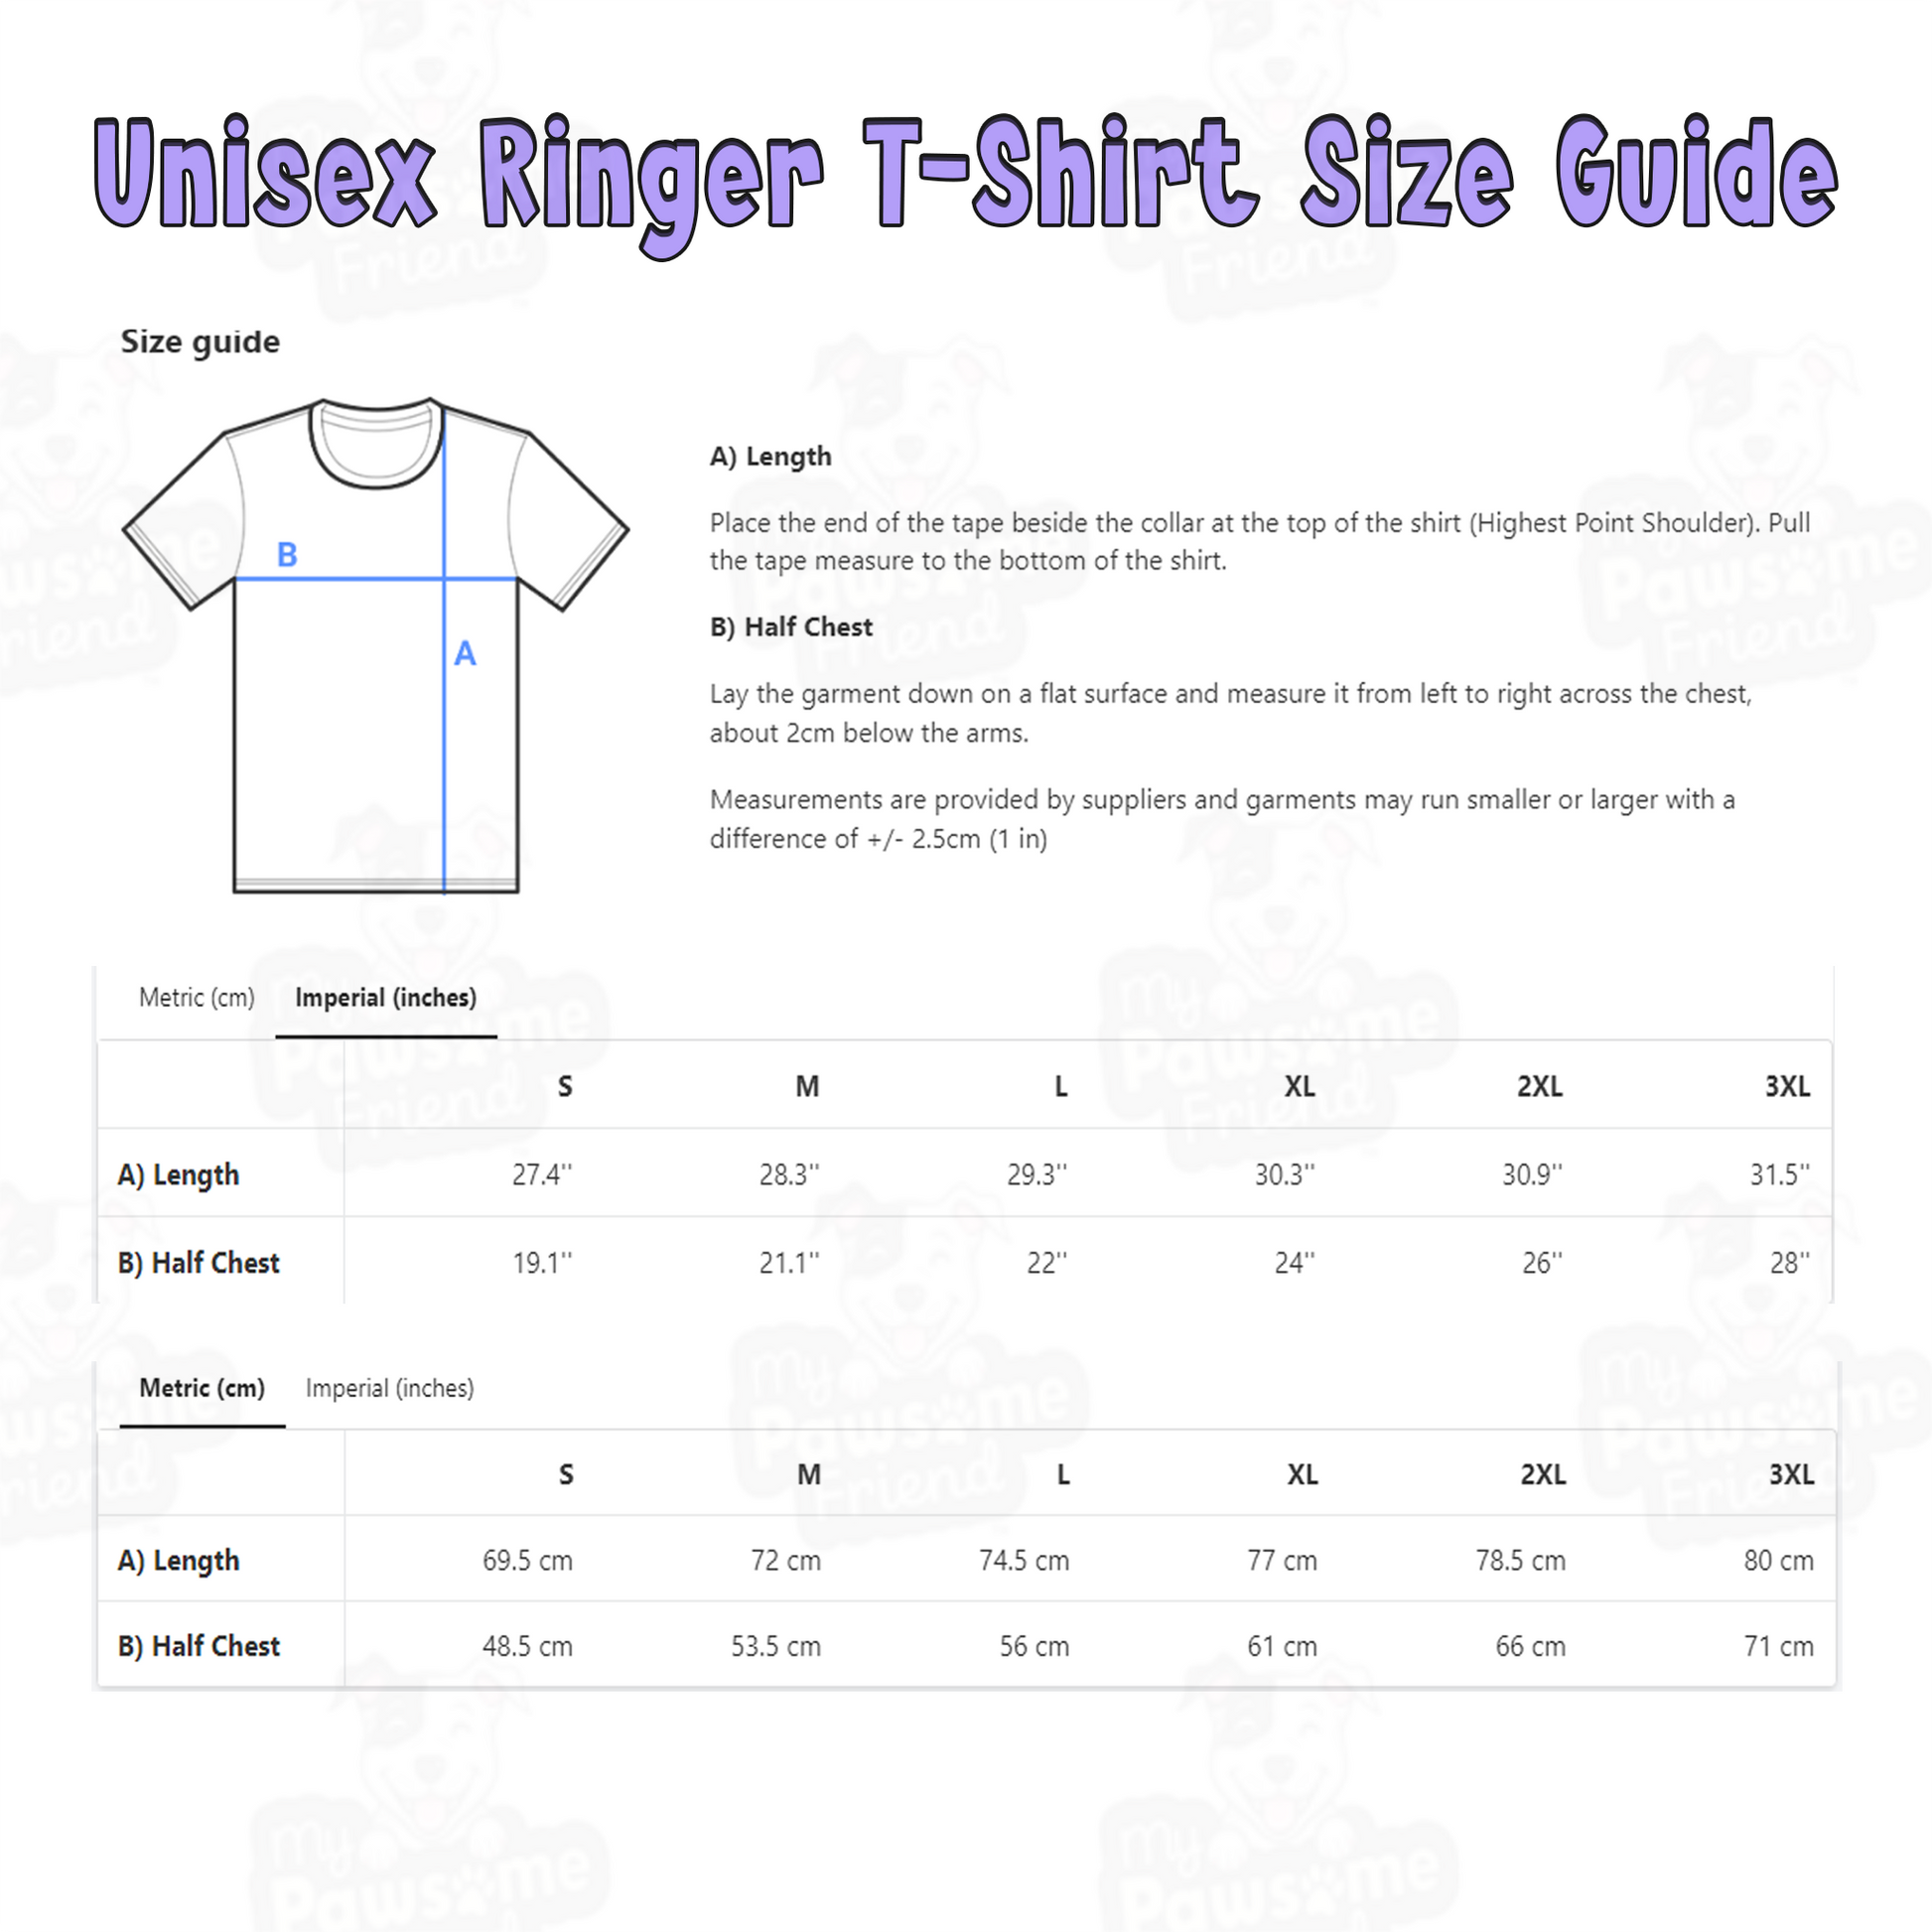 T shirt size guide for a Ringer Unisex t shirt with a cute design featuring a french bulldog smiling surrounded by heart designs, and the phrase "I love my Frenchie"